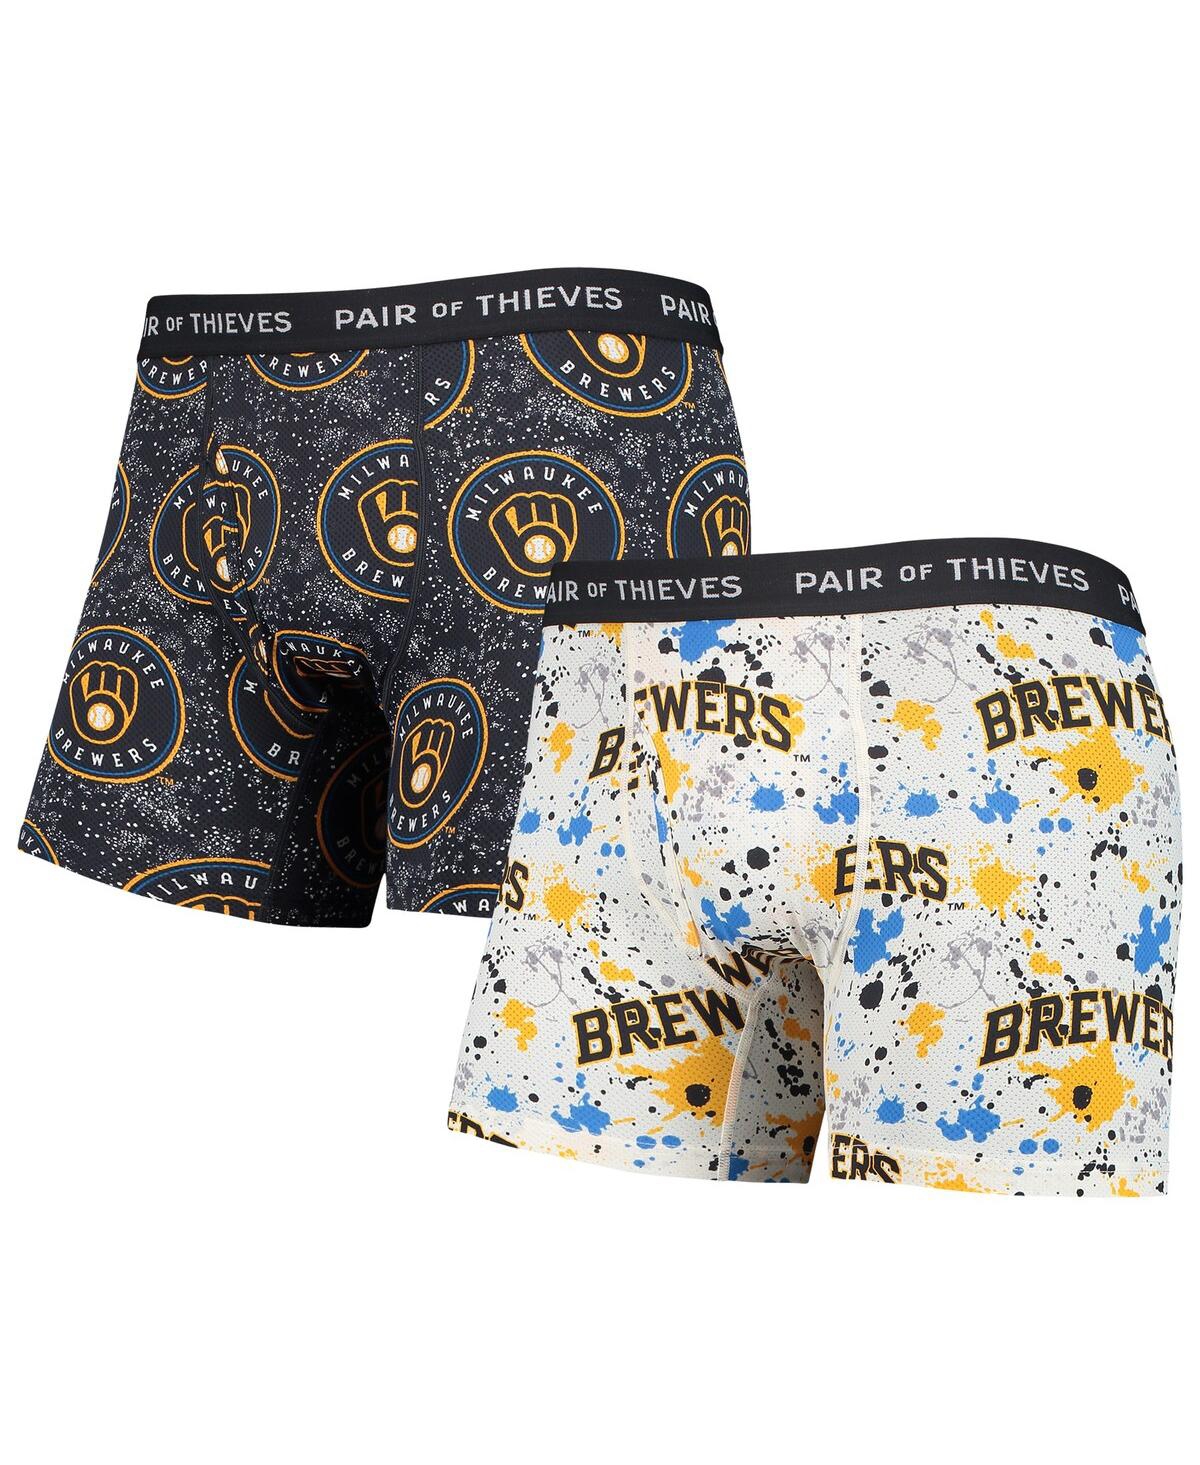 Men's Pair of Thieves White and Navy Milwaukee Brewers Super Fit 2-Pack Boxer Briefs Set - White, Navy